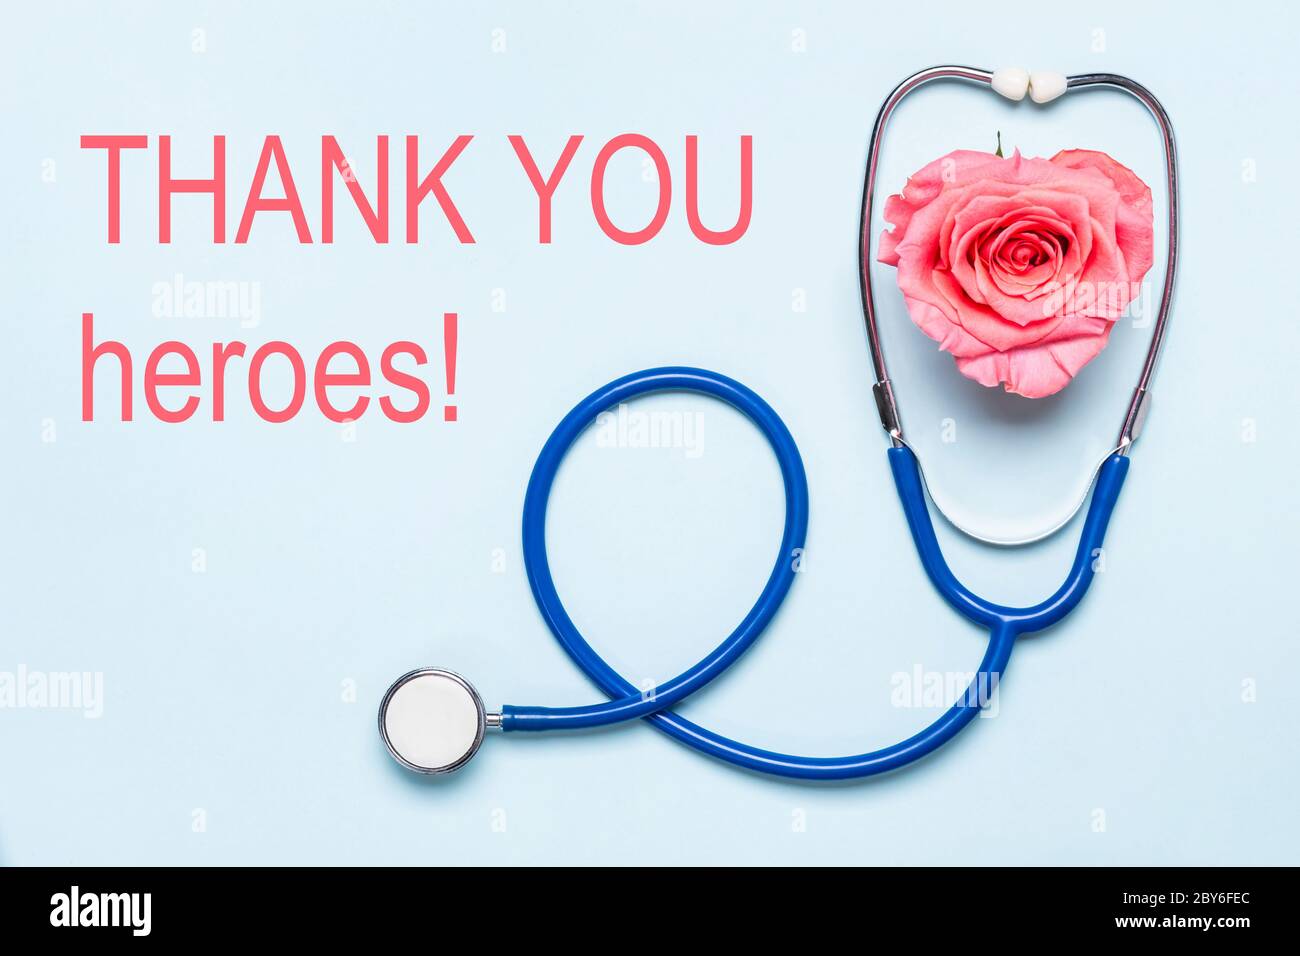 Thank you to healthcare heroes Covid-19 pandemic poster. Stethoscope and beautiful rose heart. Thanks to doctors, nurses, hospital workers. Stock Photo